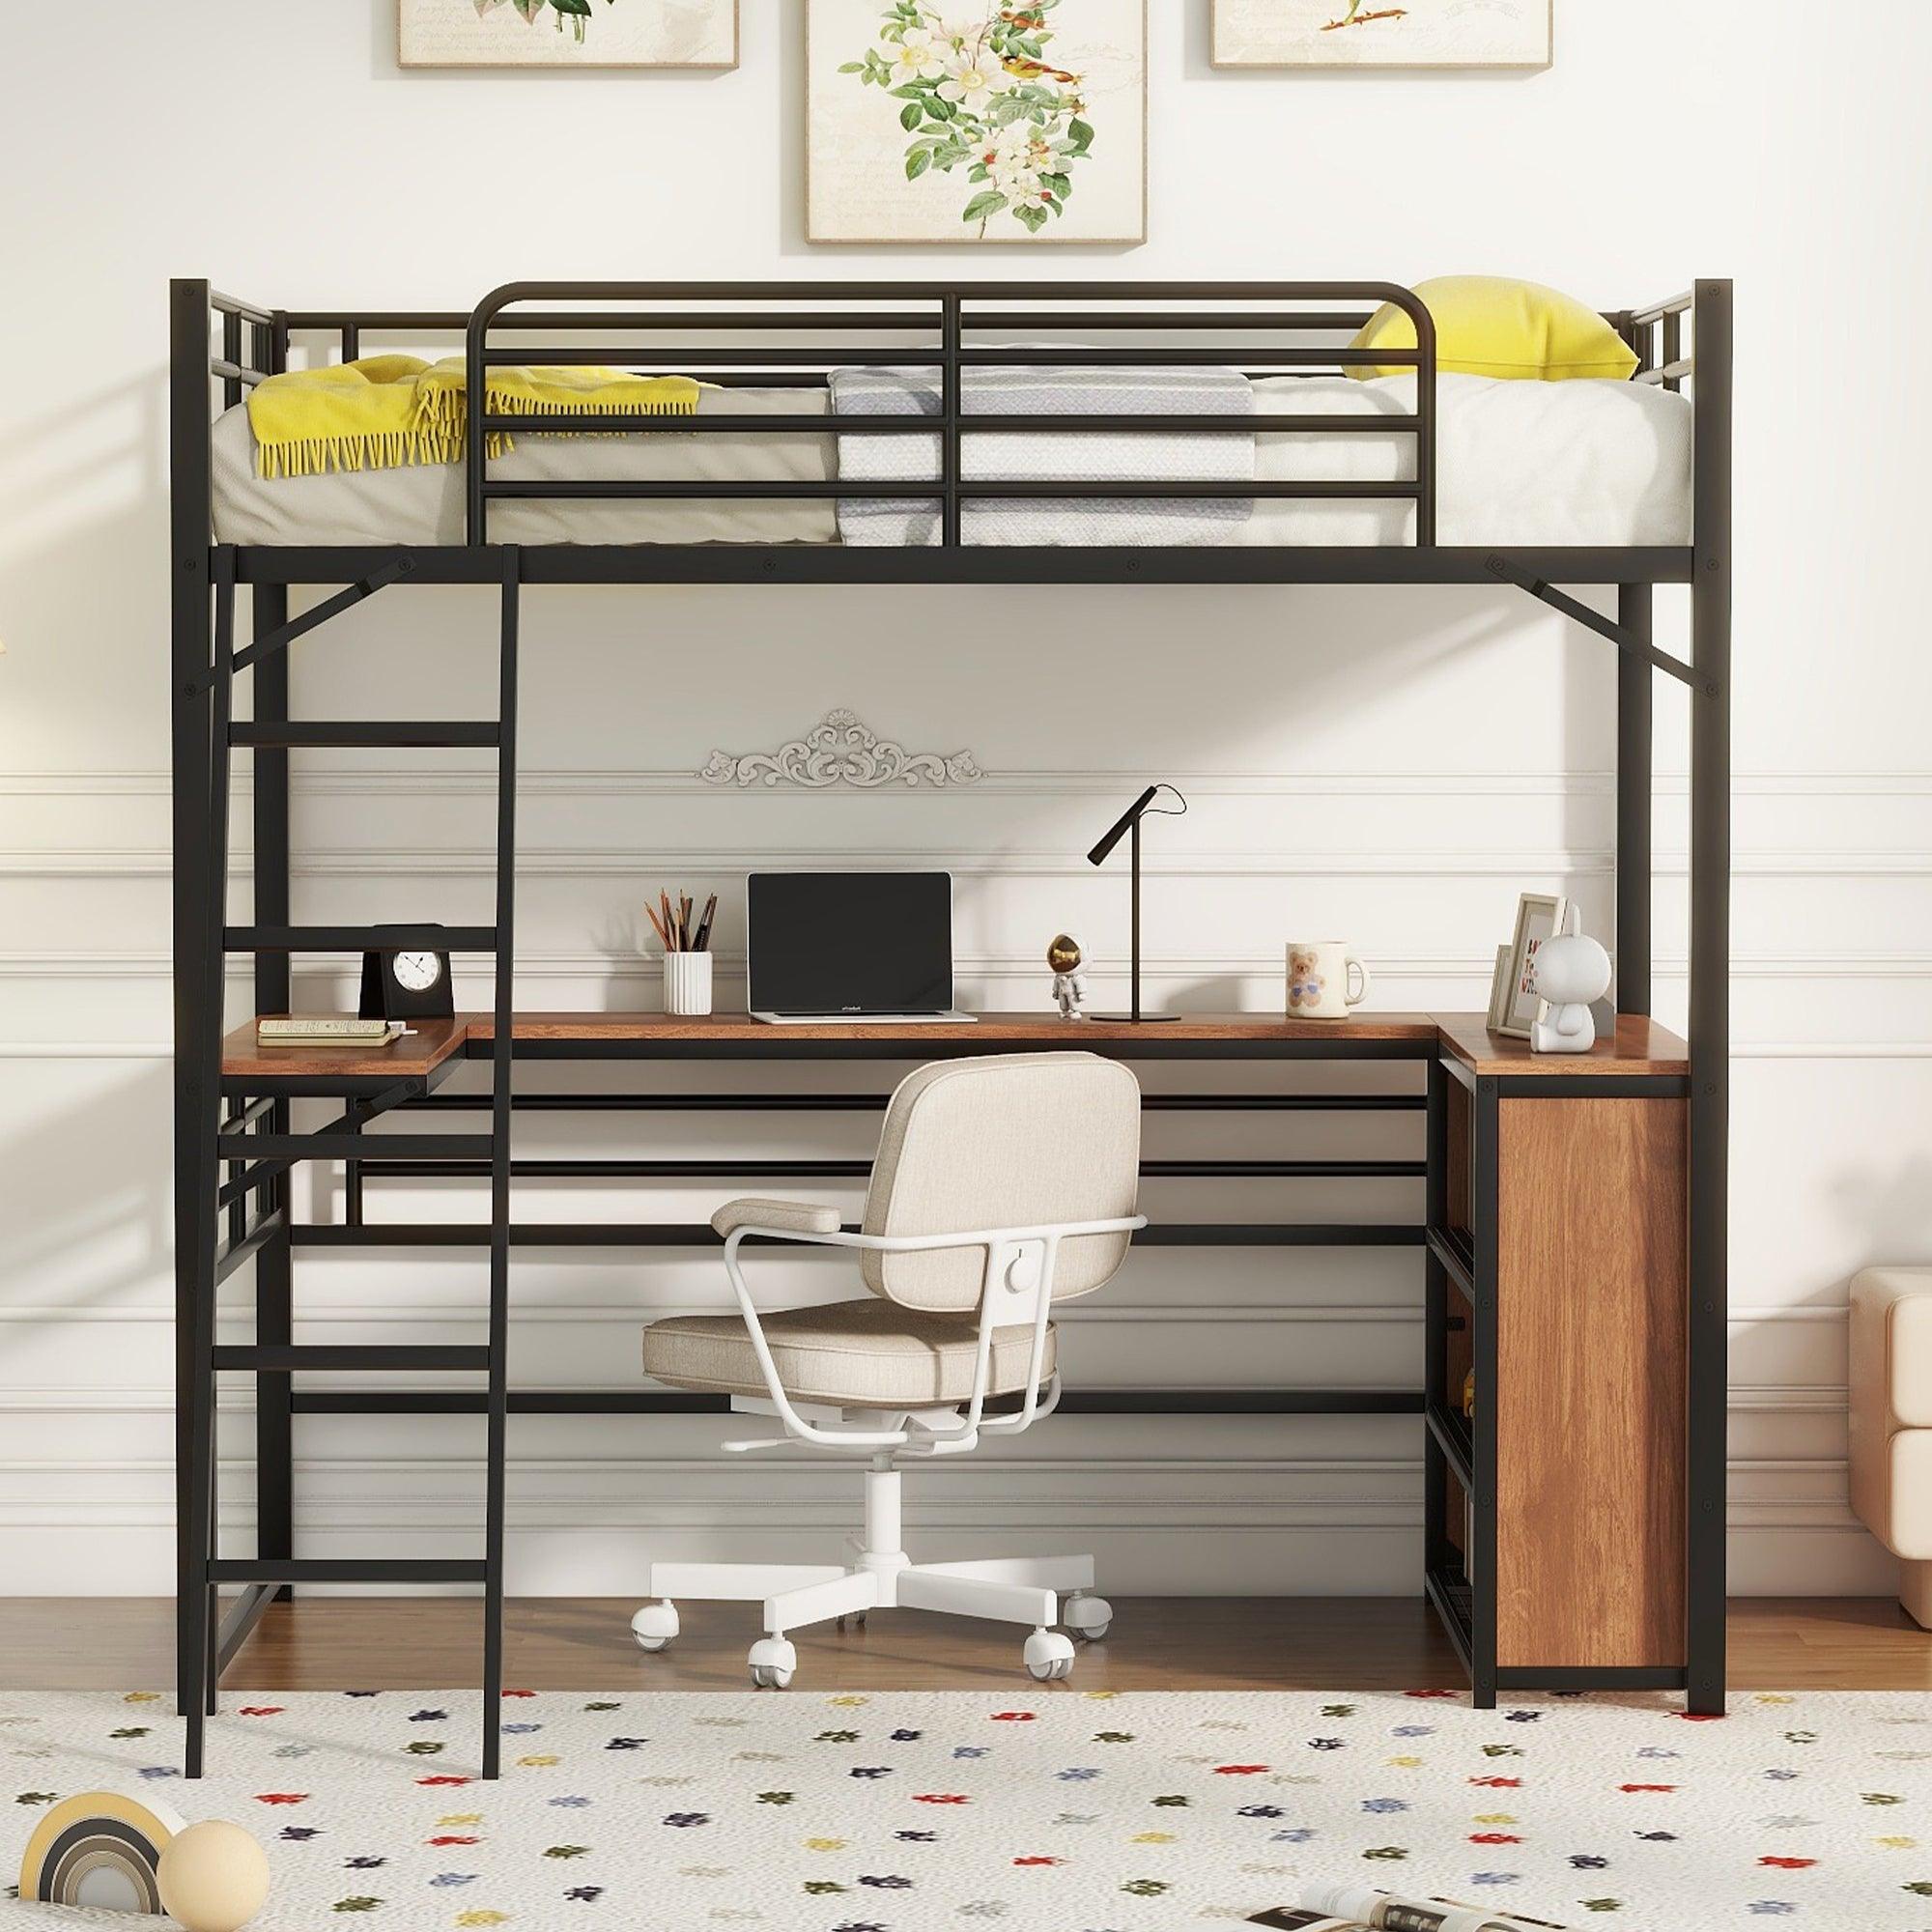 🆓🚛 Twin Size Metal Loft Bed With 3 Layers Of Shelves & L-Shaped Desk, Black